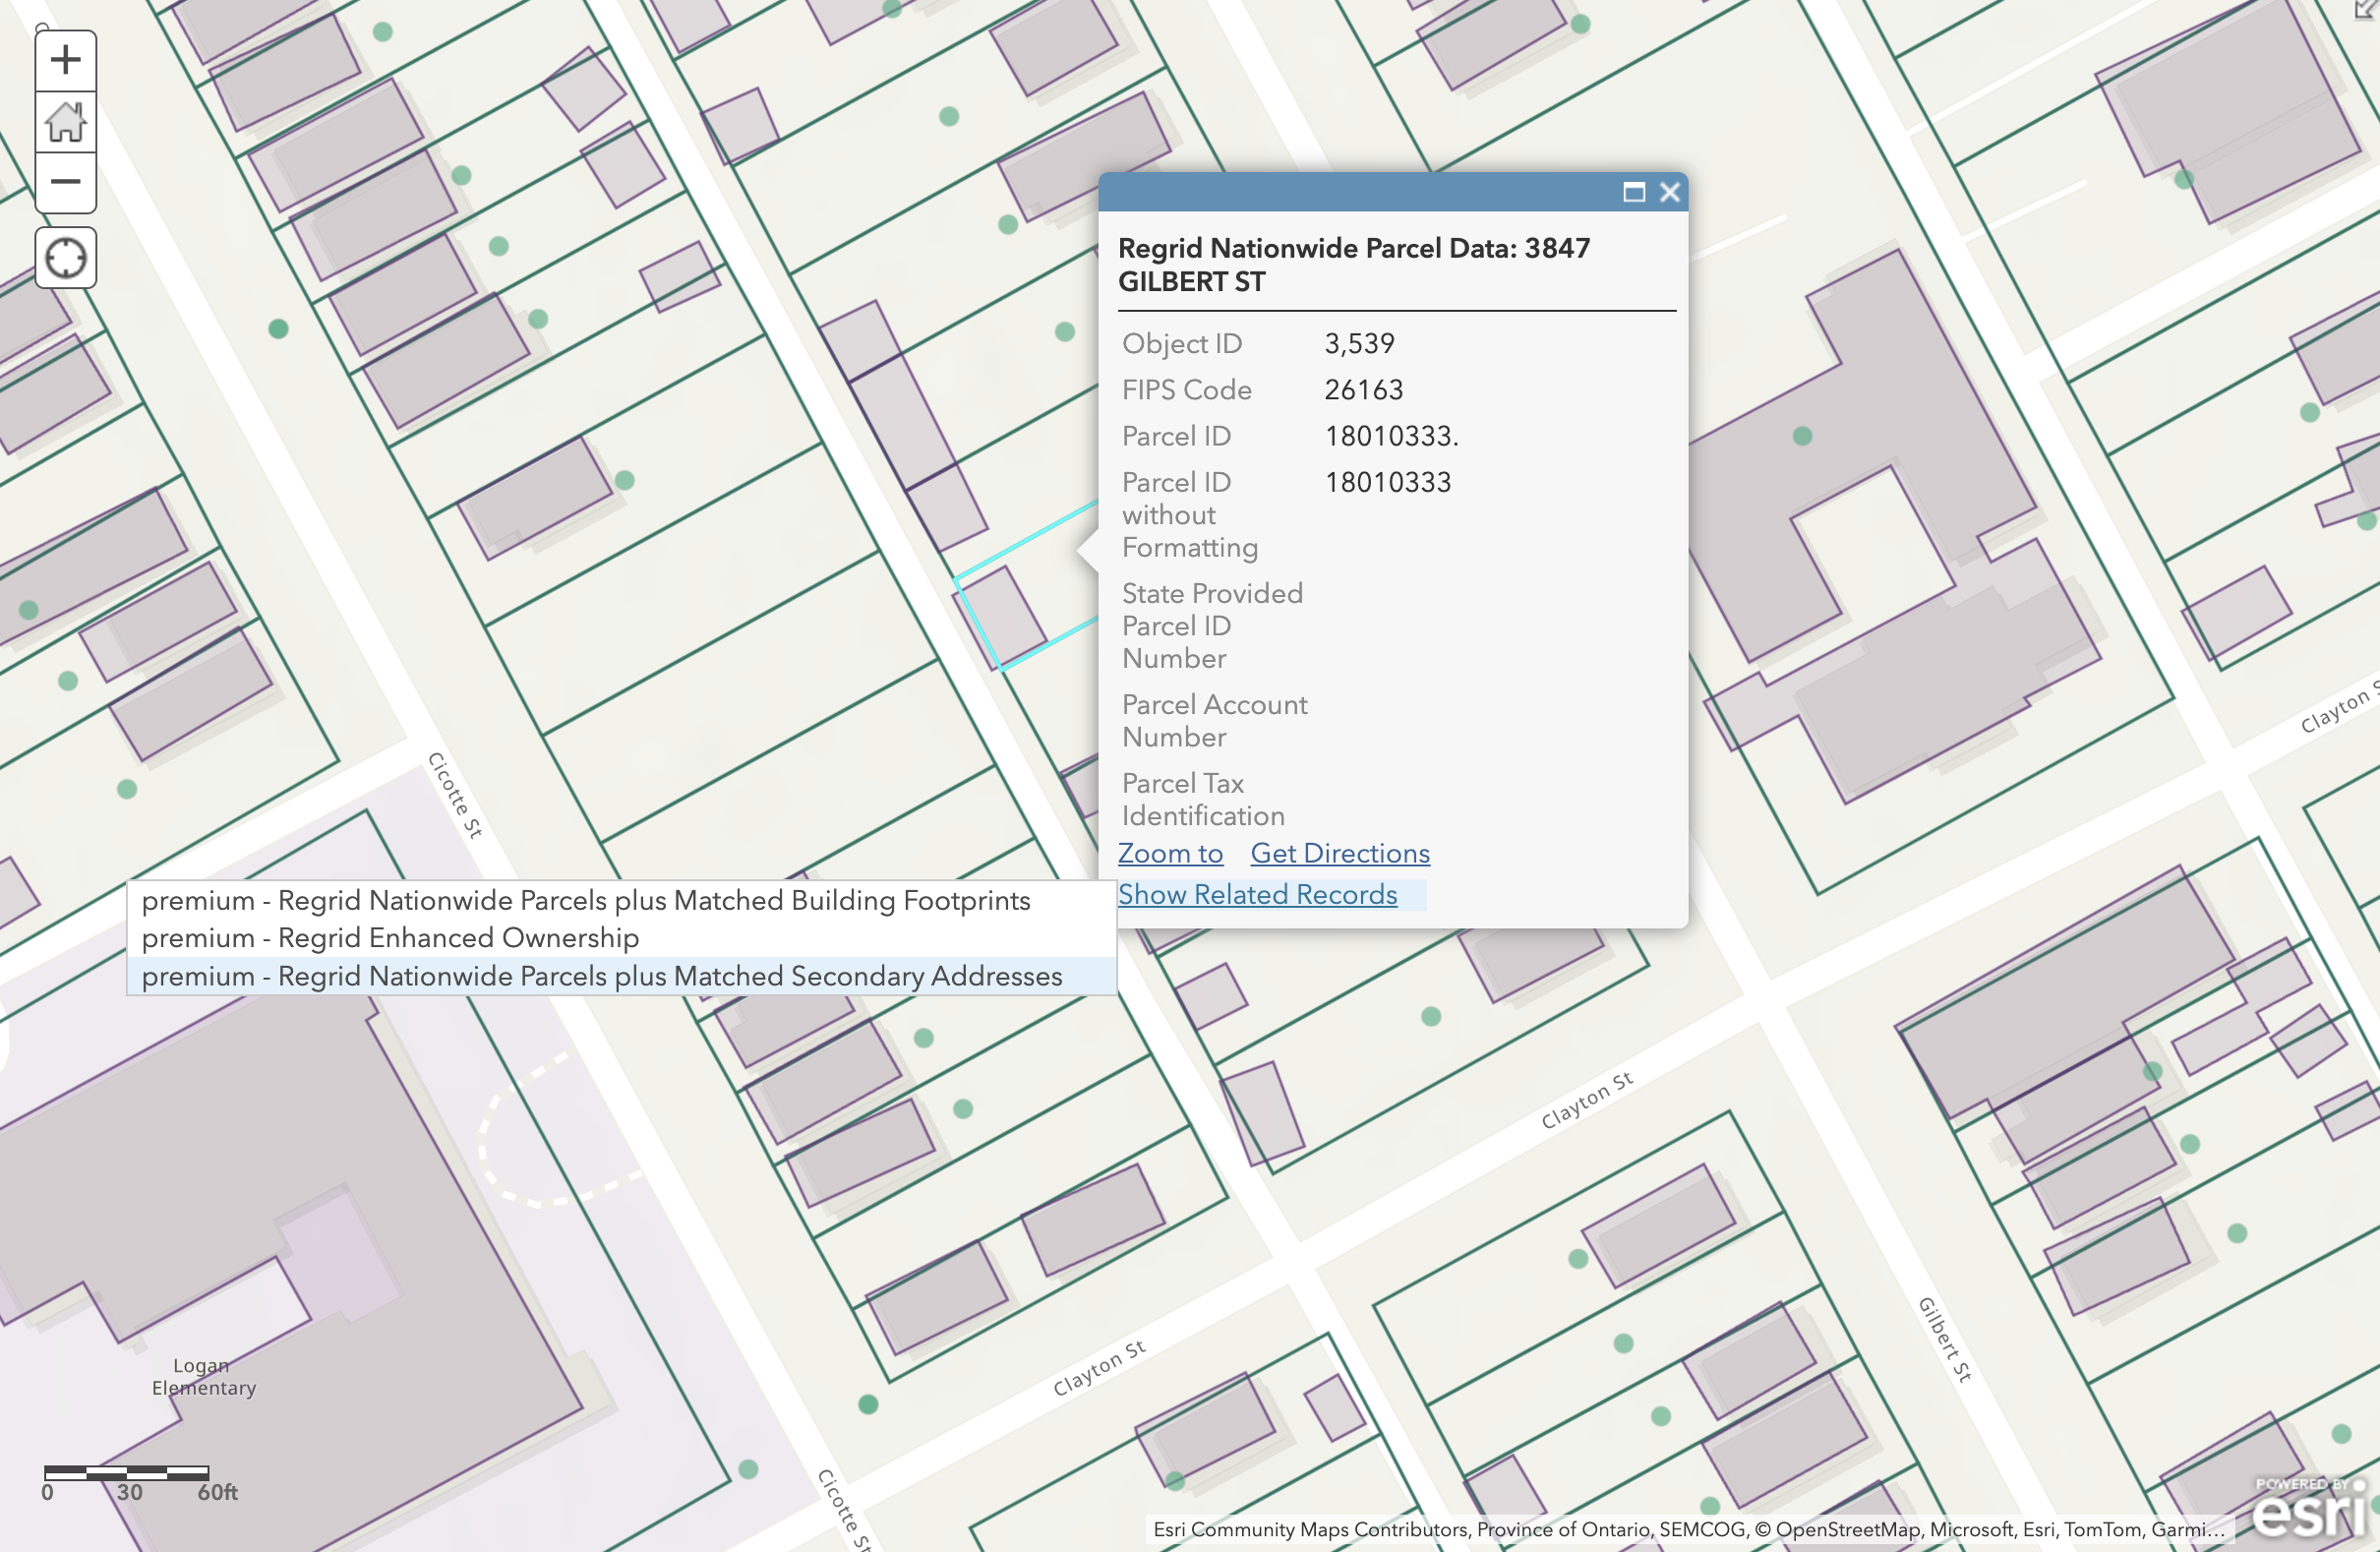 ArcGIS programs and SDKs can access and display related records.